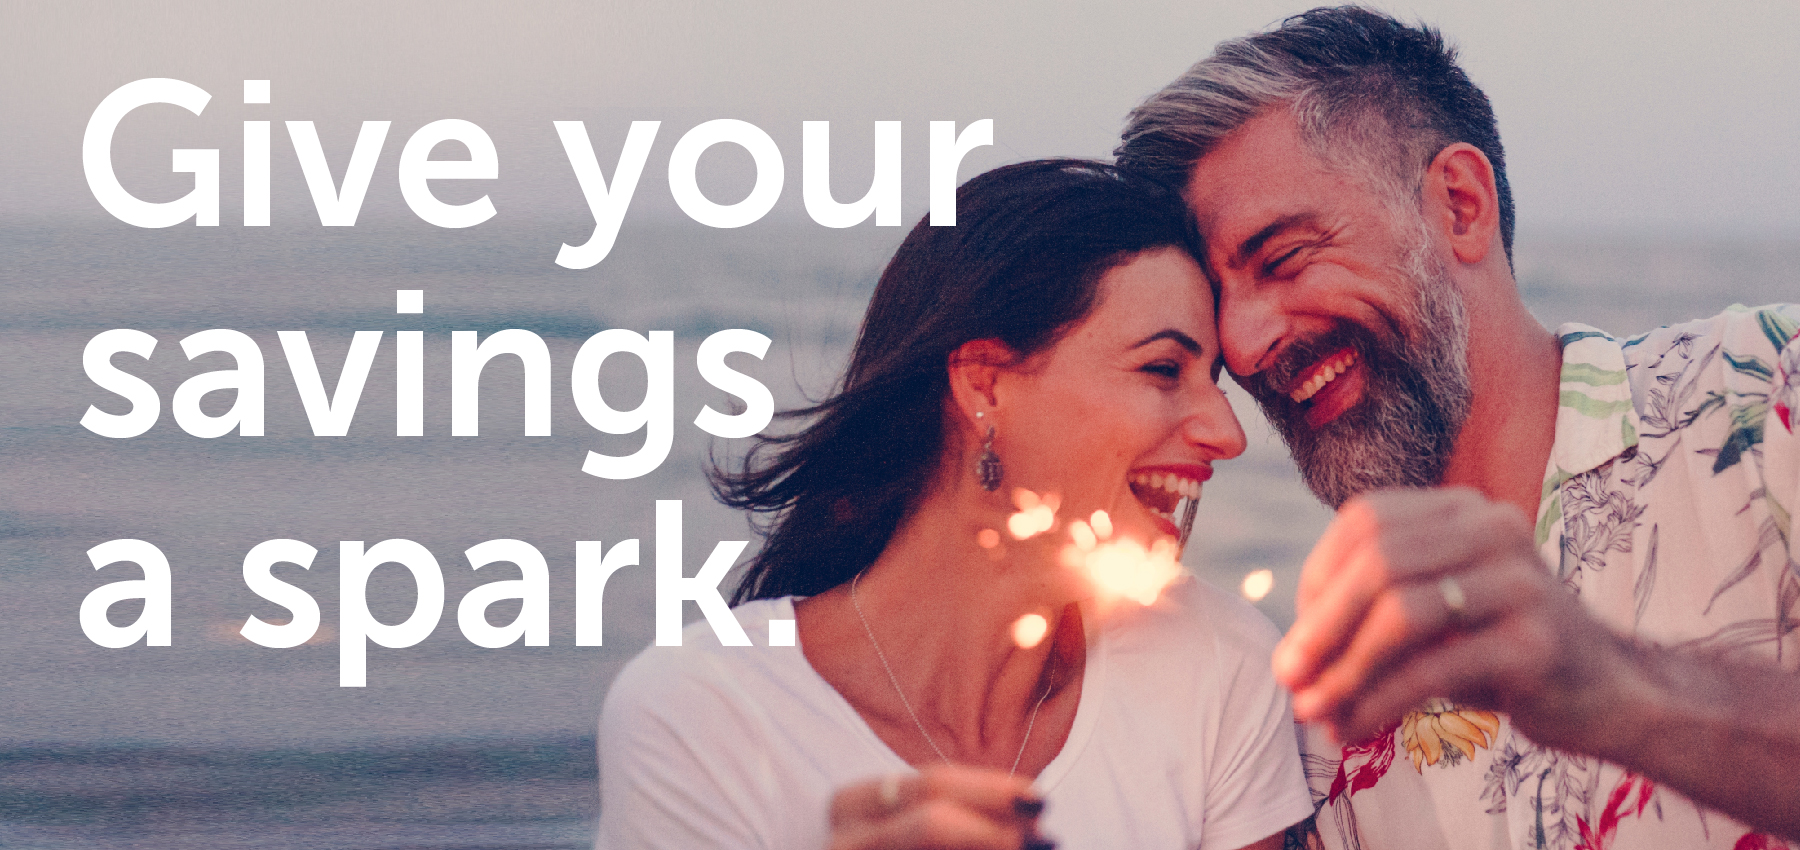 Give your savings a spark.